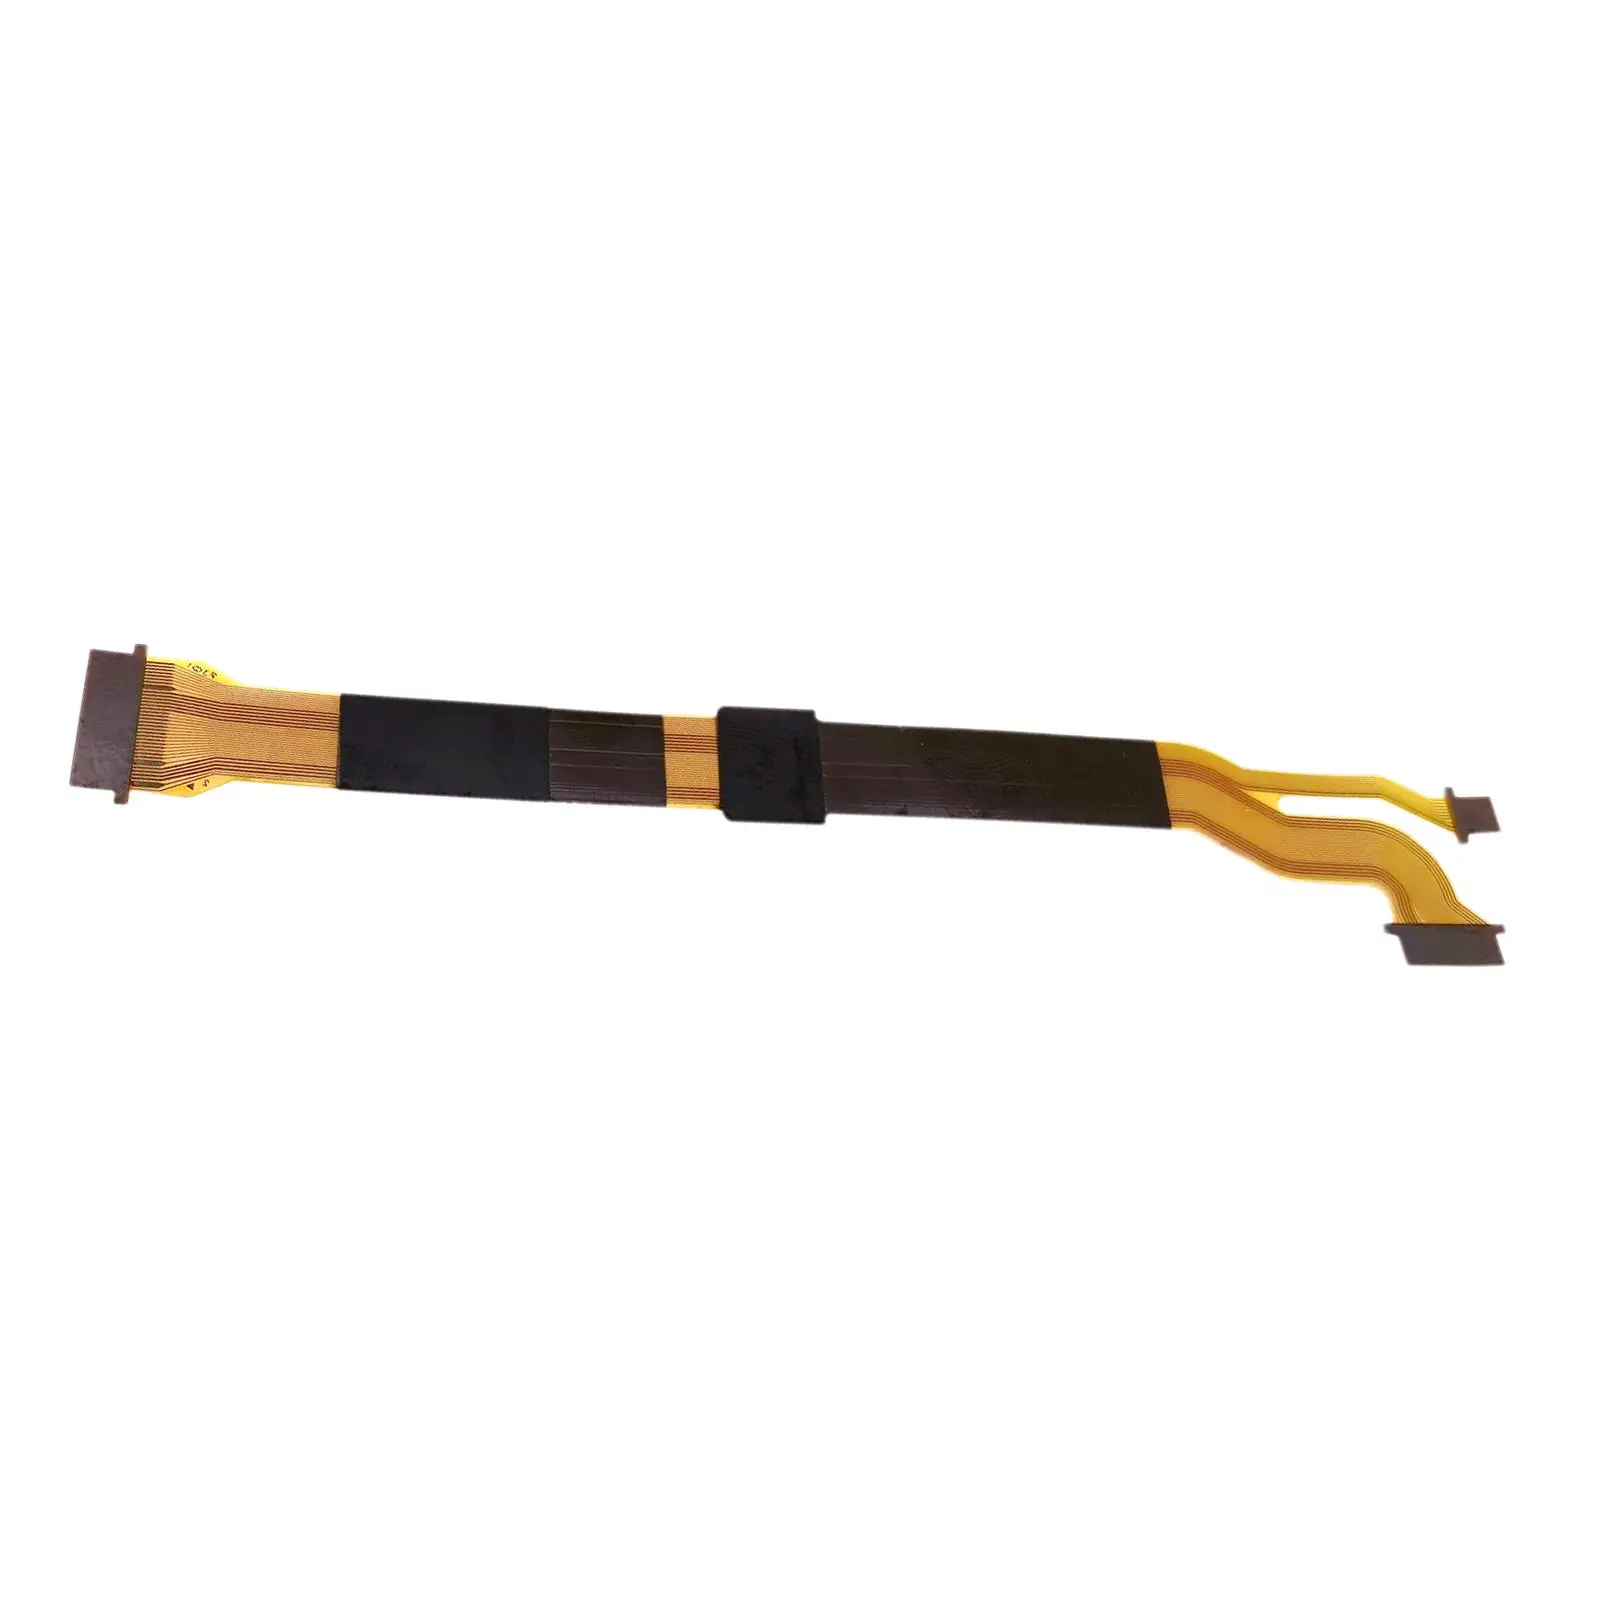 Lens Anti SHAKE Flex Cable Easy to Install Fittings Professional High Performance Replacement Accessory Camera for E 55-210 mm